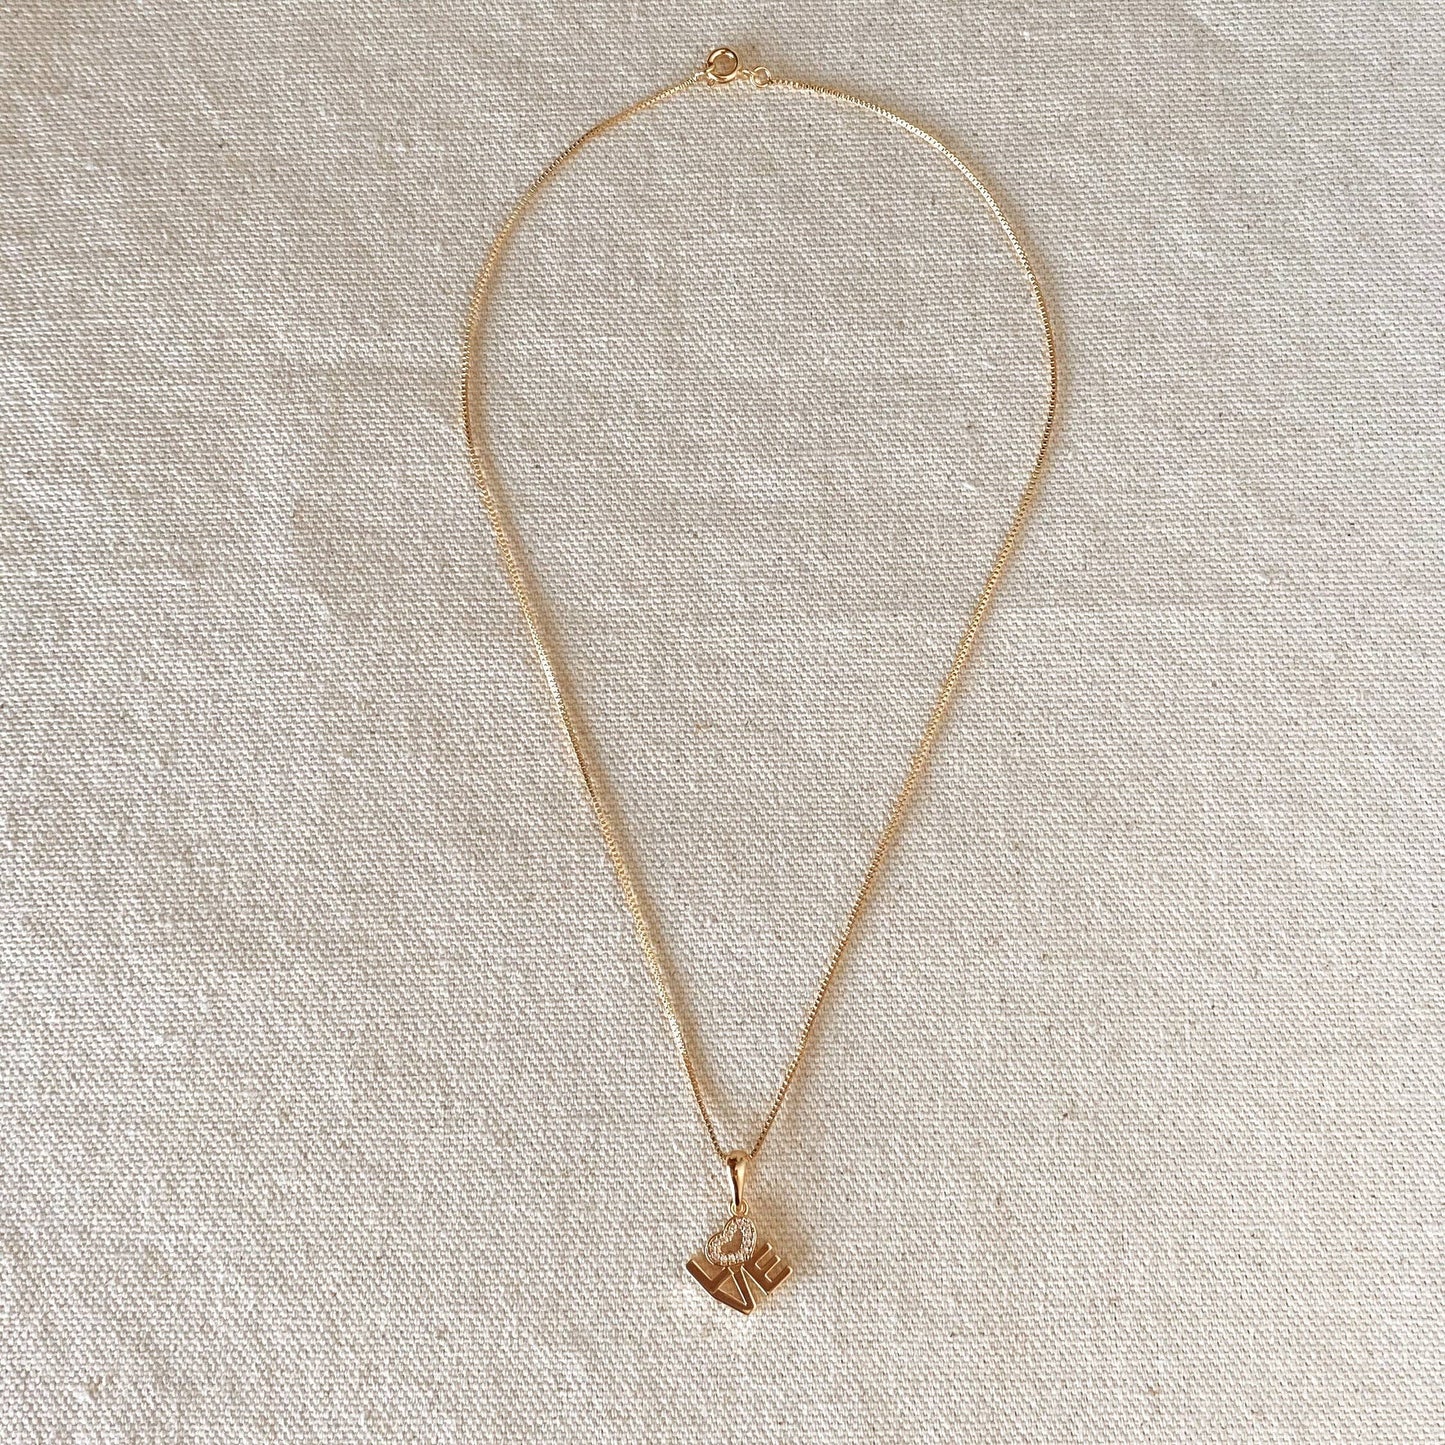 18K Gold Filled Love Letter Stack Necklace: 16 inches